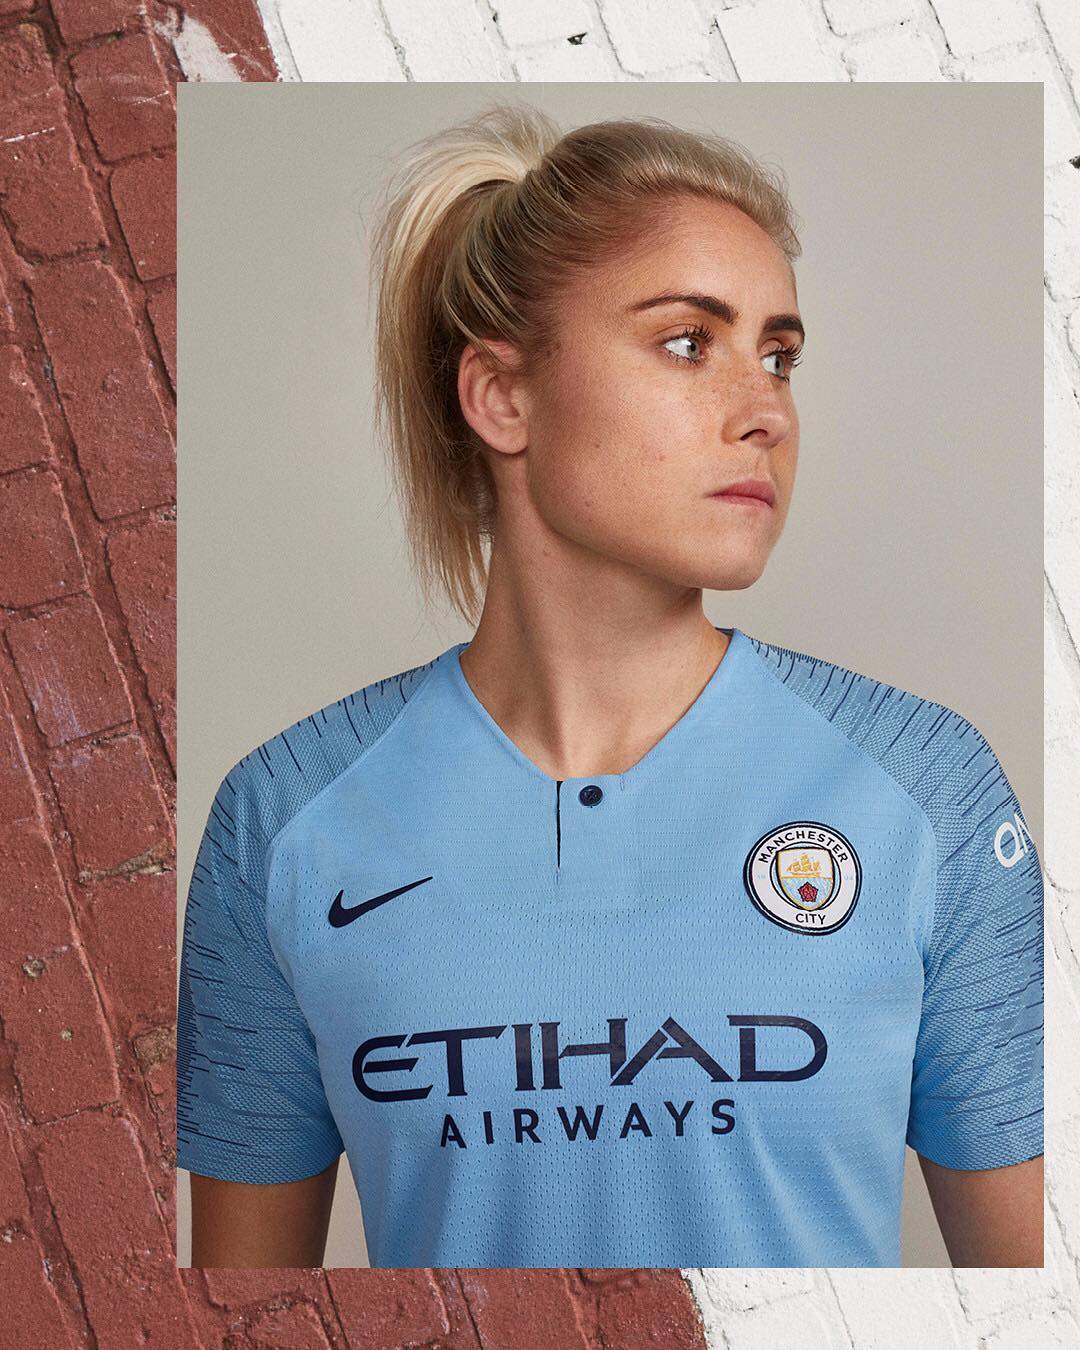 51 Hot Pictures Of Steph Houghton Will Heat Up Your Blood With Fire And Energy For This Sexy Diva 771